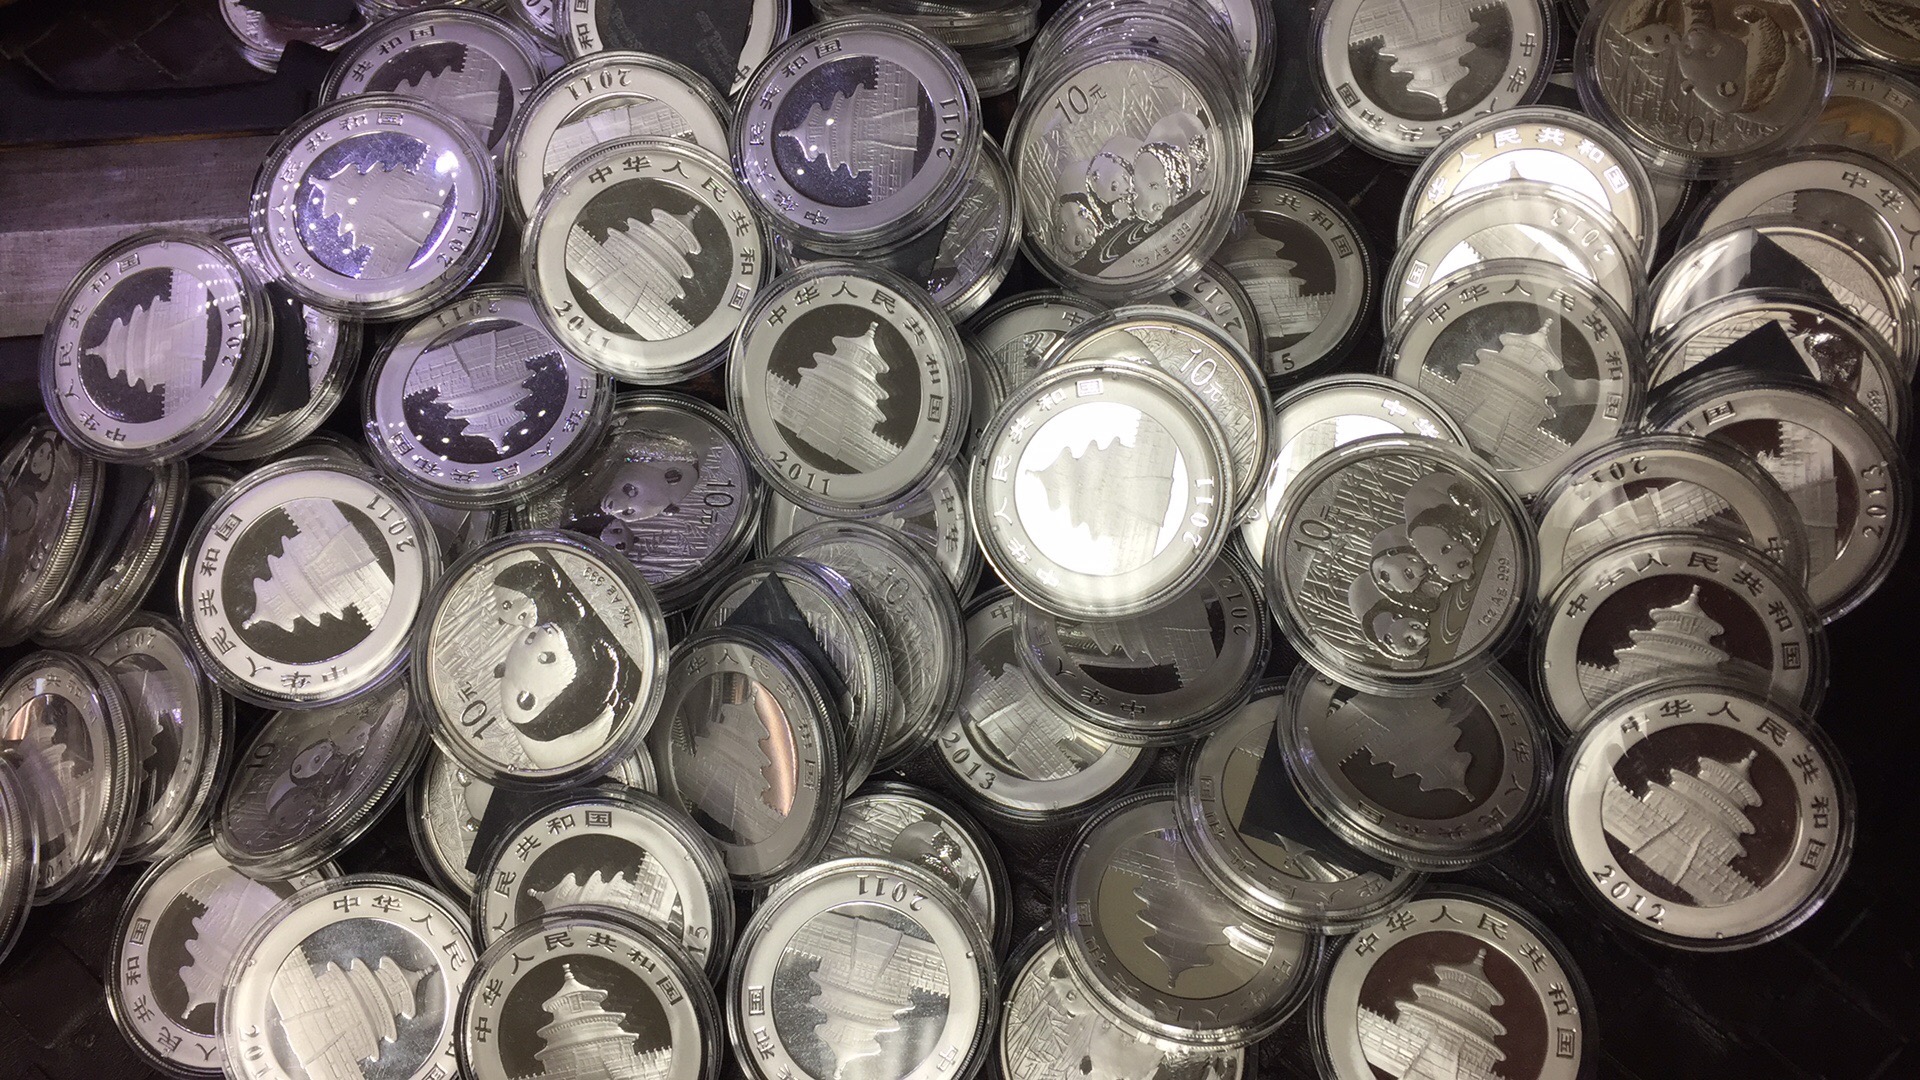 OAKTON COINS & COLLECTIBLES BUYS ALL FORMS OF GOLD AND SILVER FROM PARK RIDGE ILLINOIS.